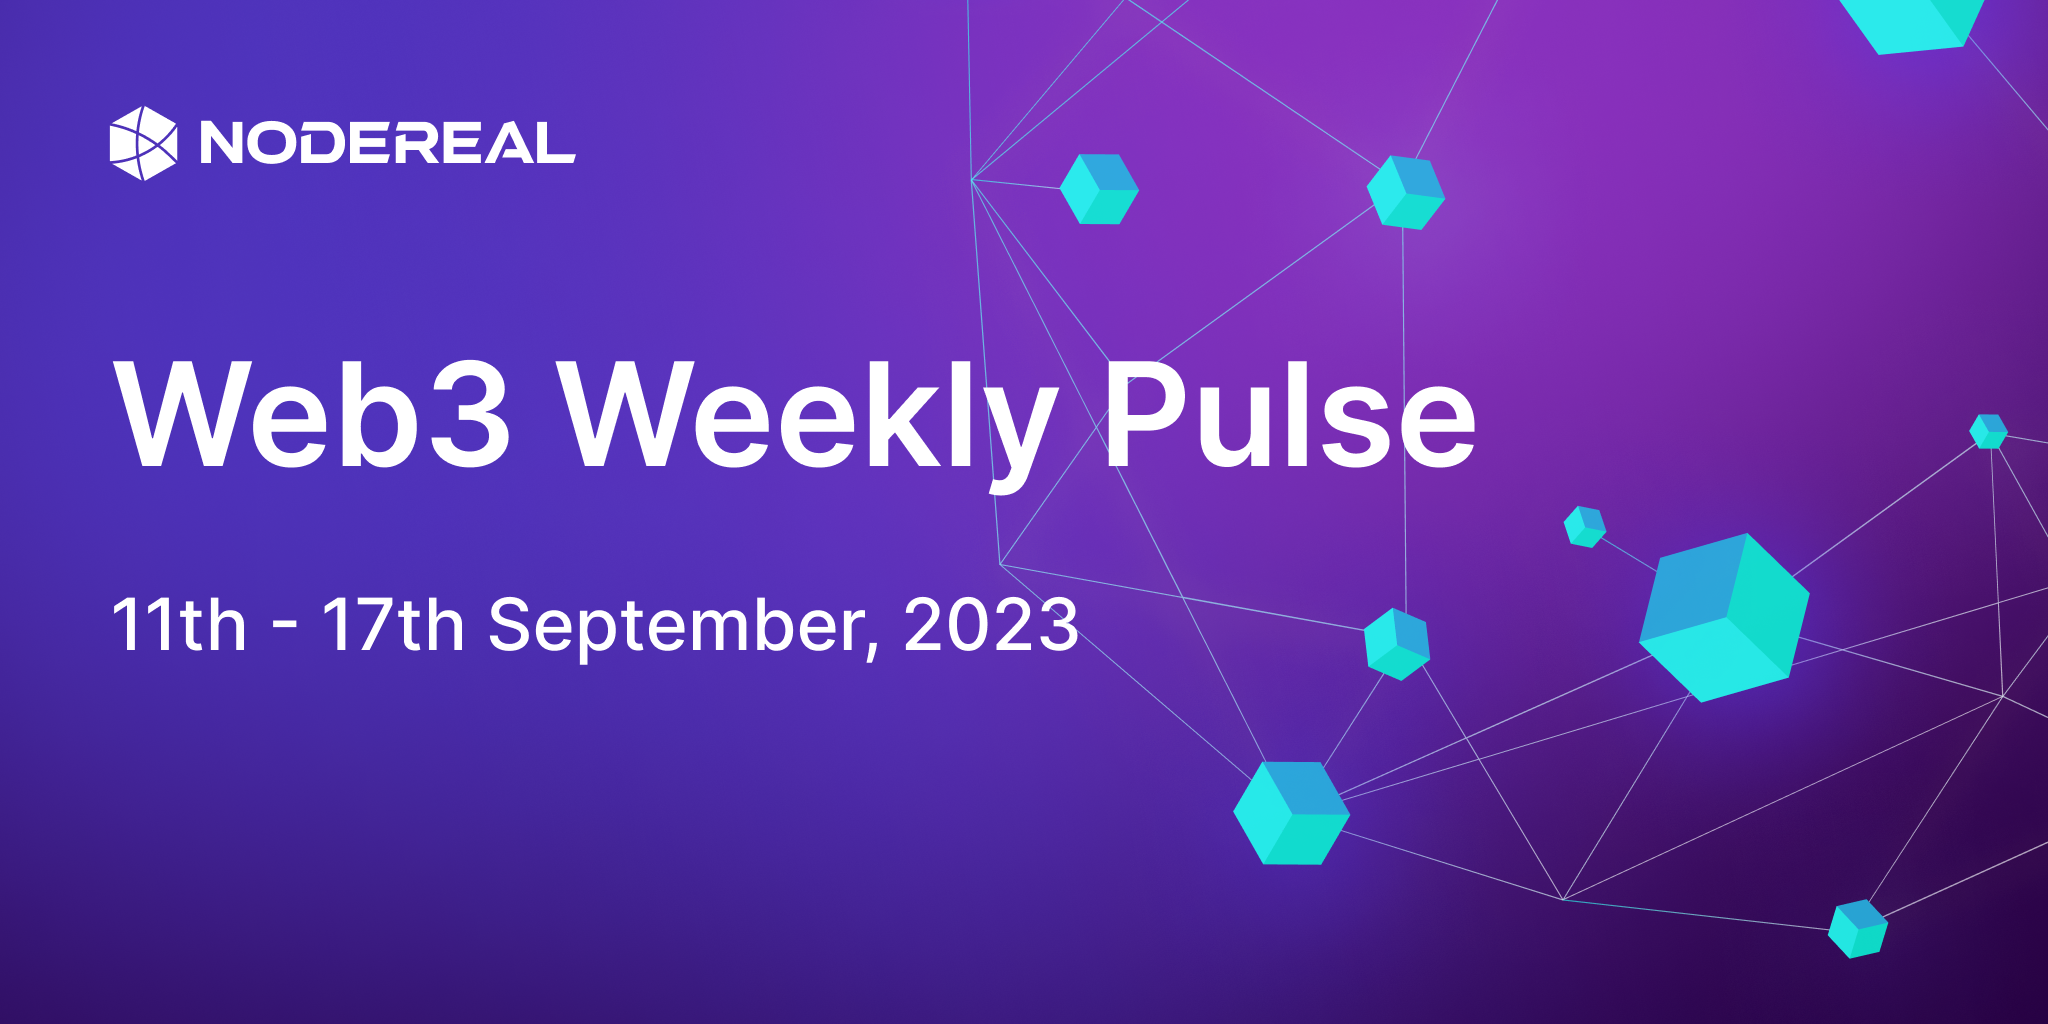 Web3 Weekly Pulse: 11th - 17th September